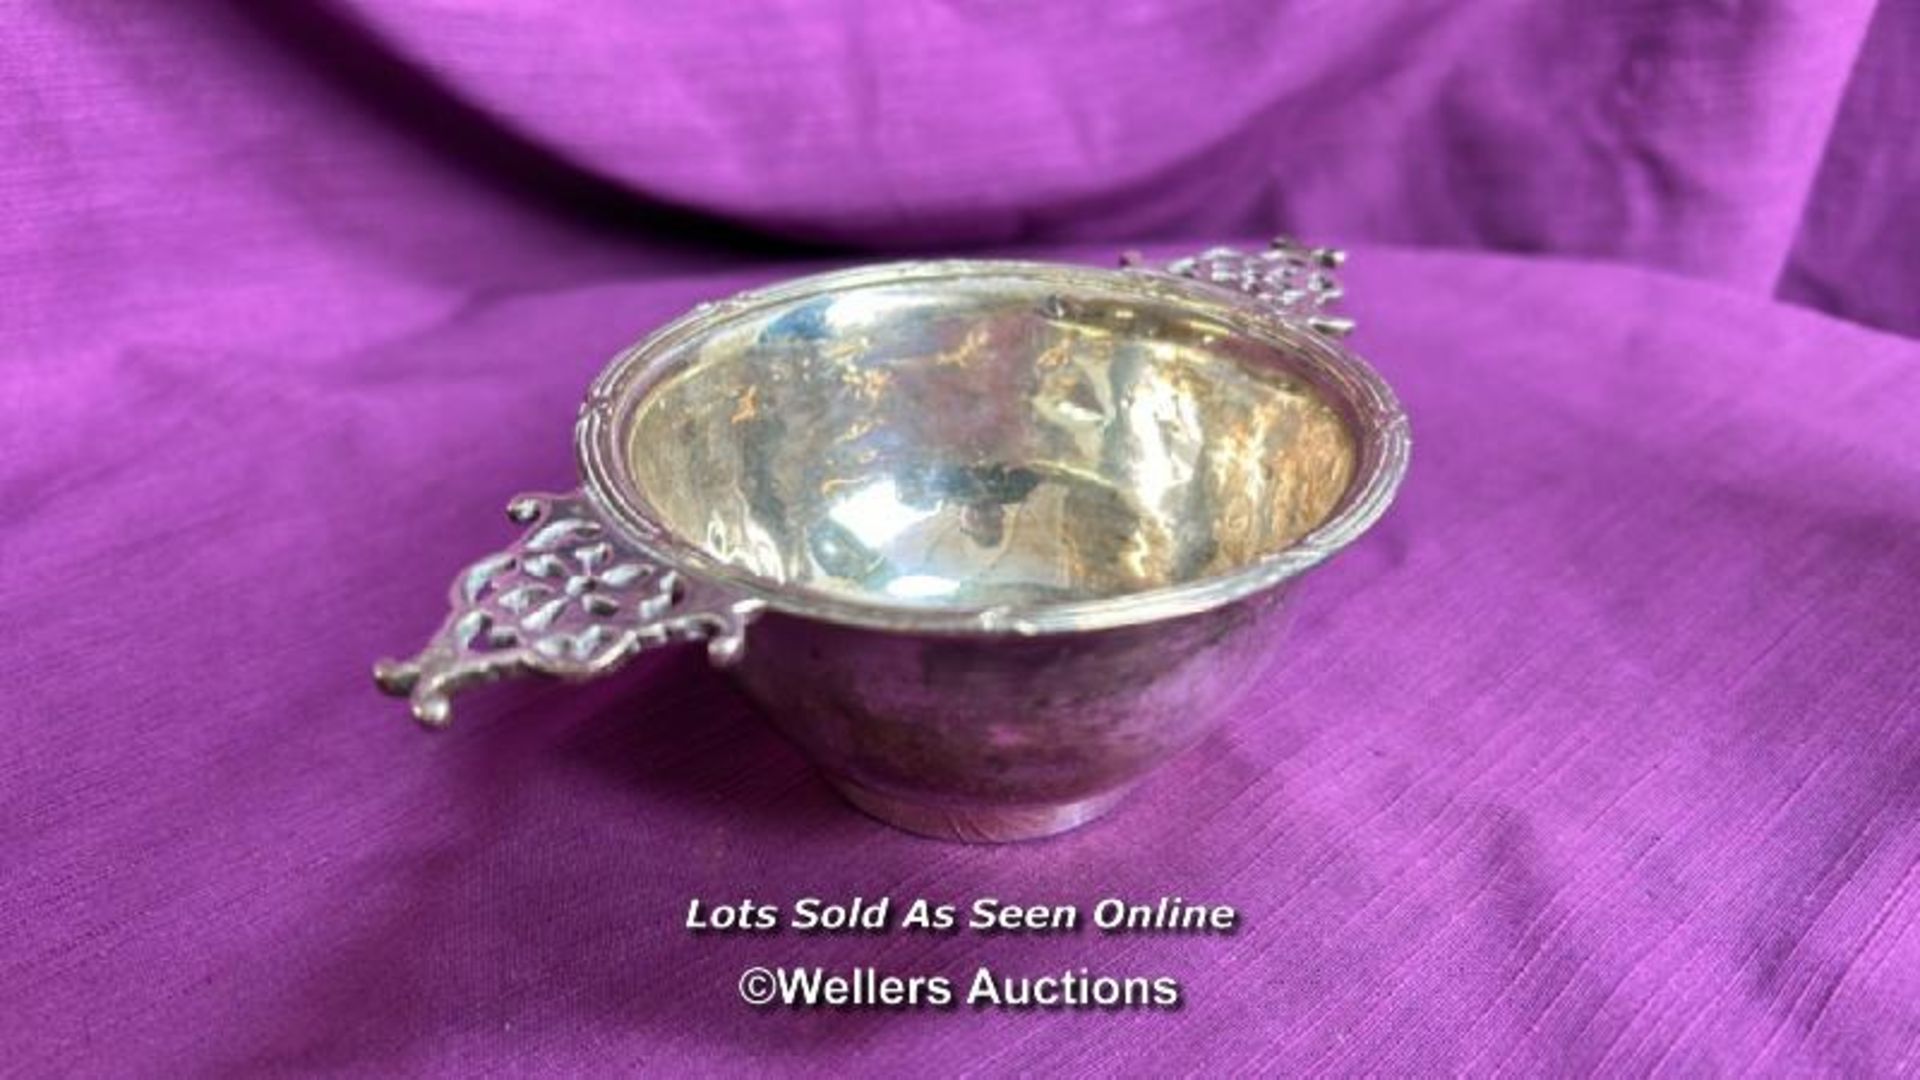 SMALL HALLMARKED SILVER BONBON DISH BY GOLDSMITH AND SILVERSMITH CO., HEIGHT 5CM, WEIGHT 133GMS - Image 2 of 5